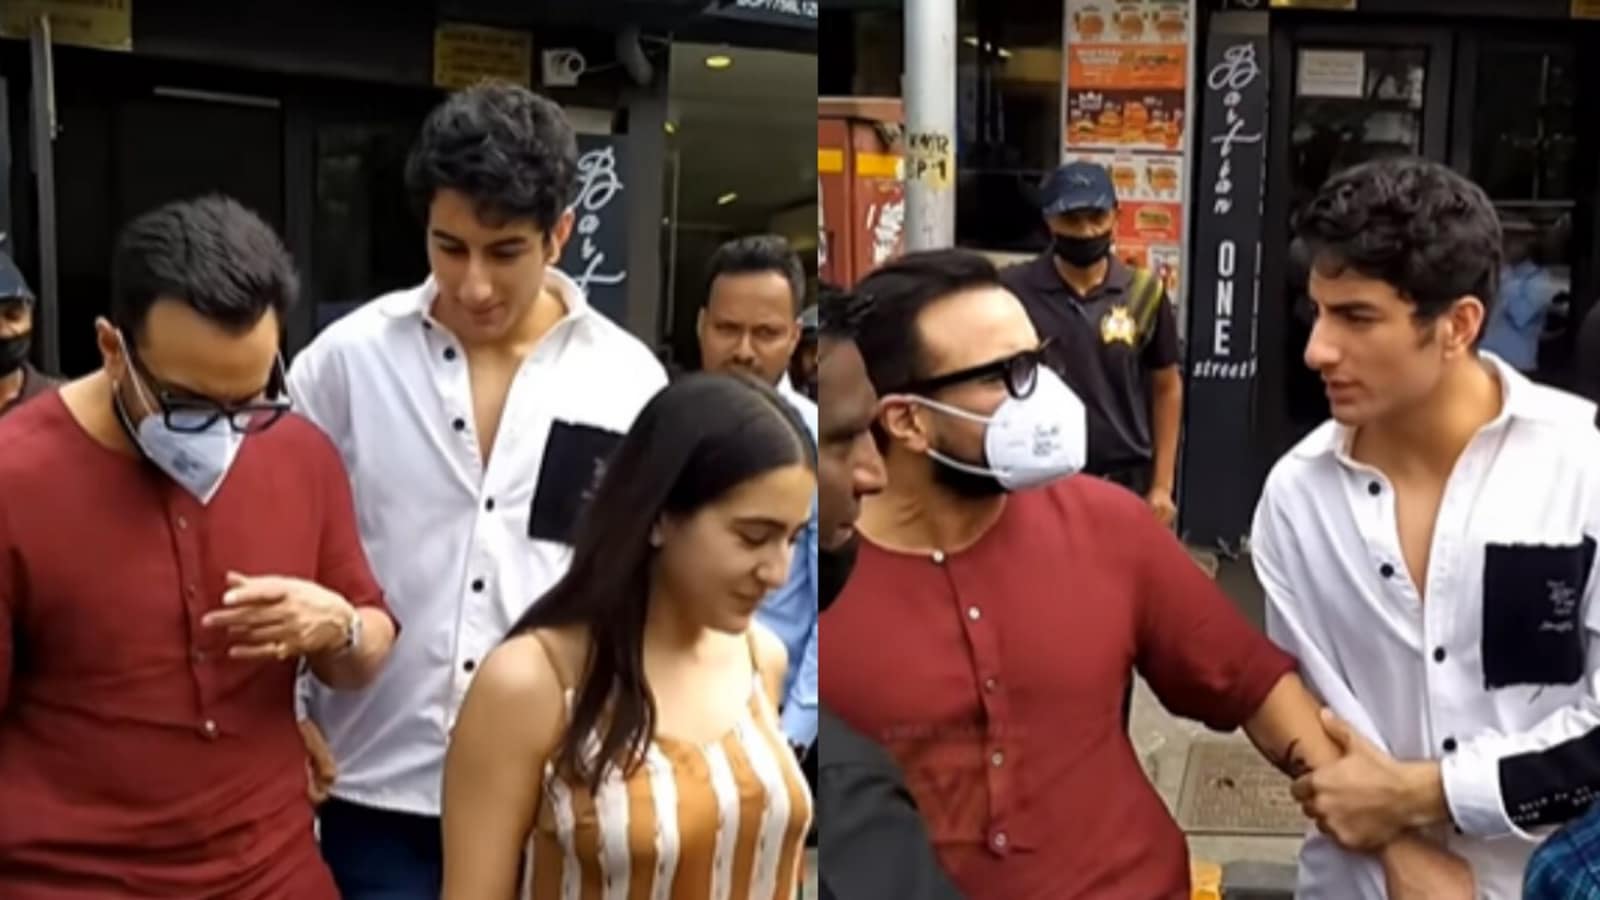 Ibrahim Ali Khan holds Saif Ali Khan’s hand after family lunch with Sara Ali Khan, fans say: He’s like ‘dad don’t go’